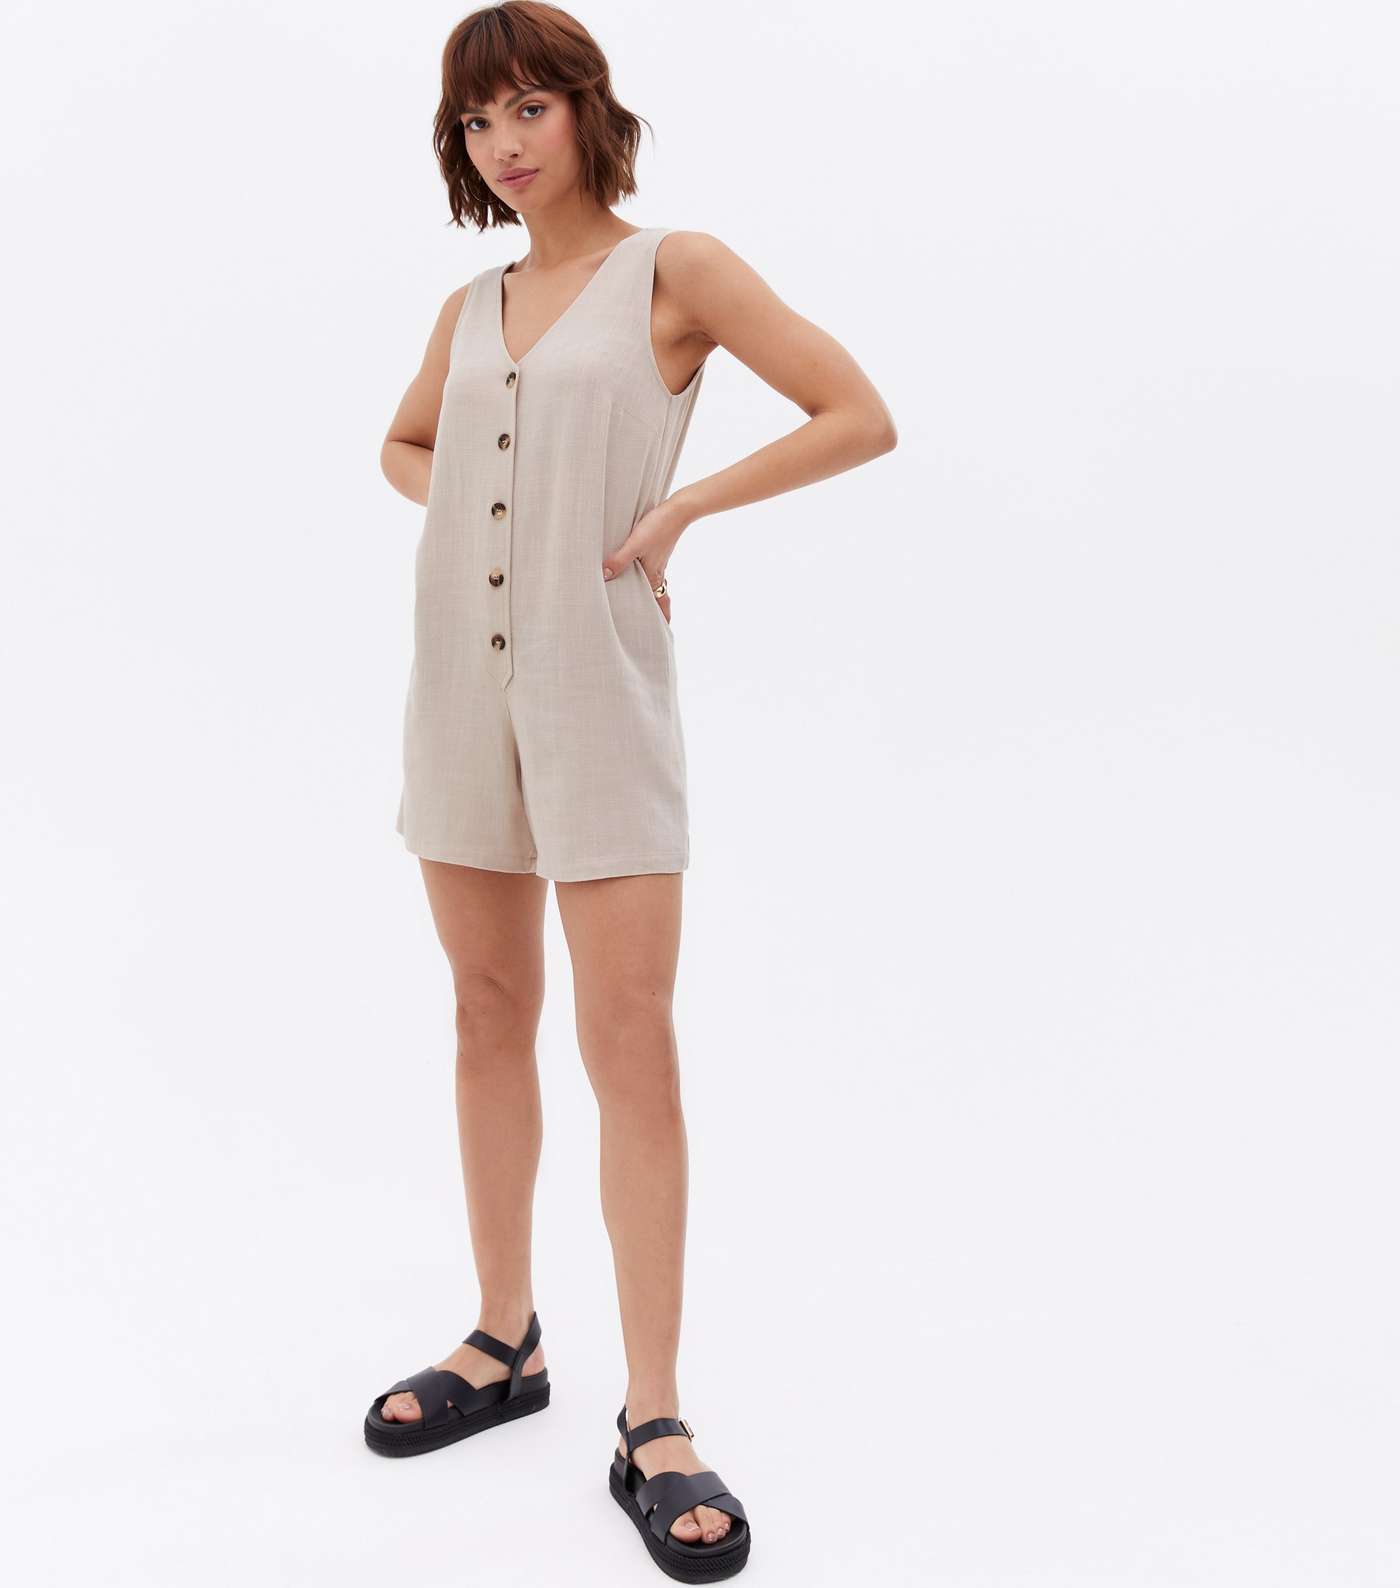 Stone Linen-Look Button Front Sleeveless Playsuit Image 2